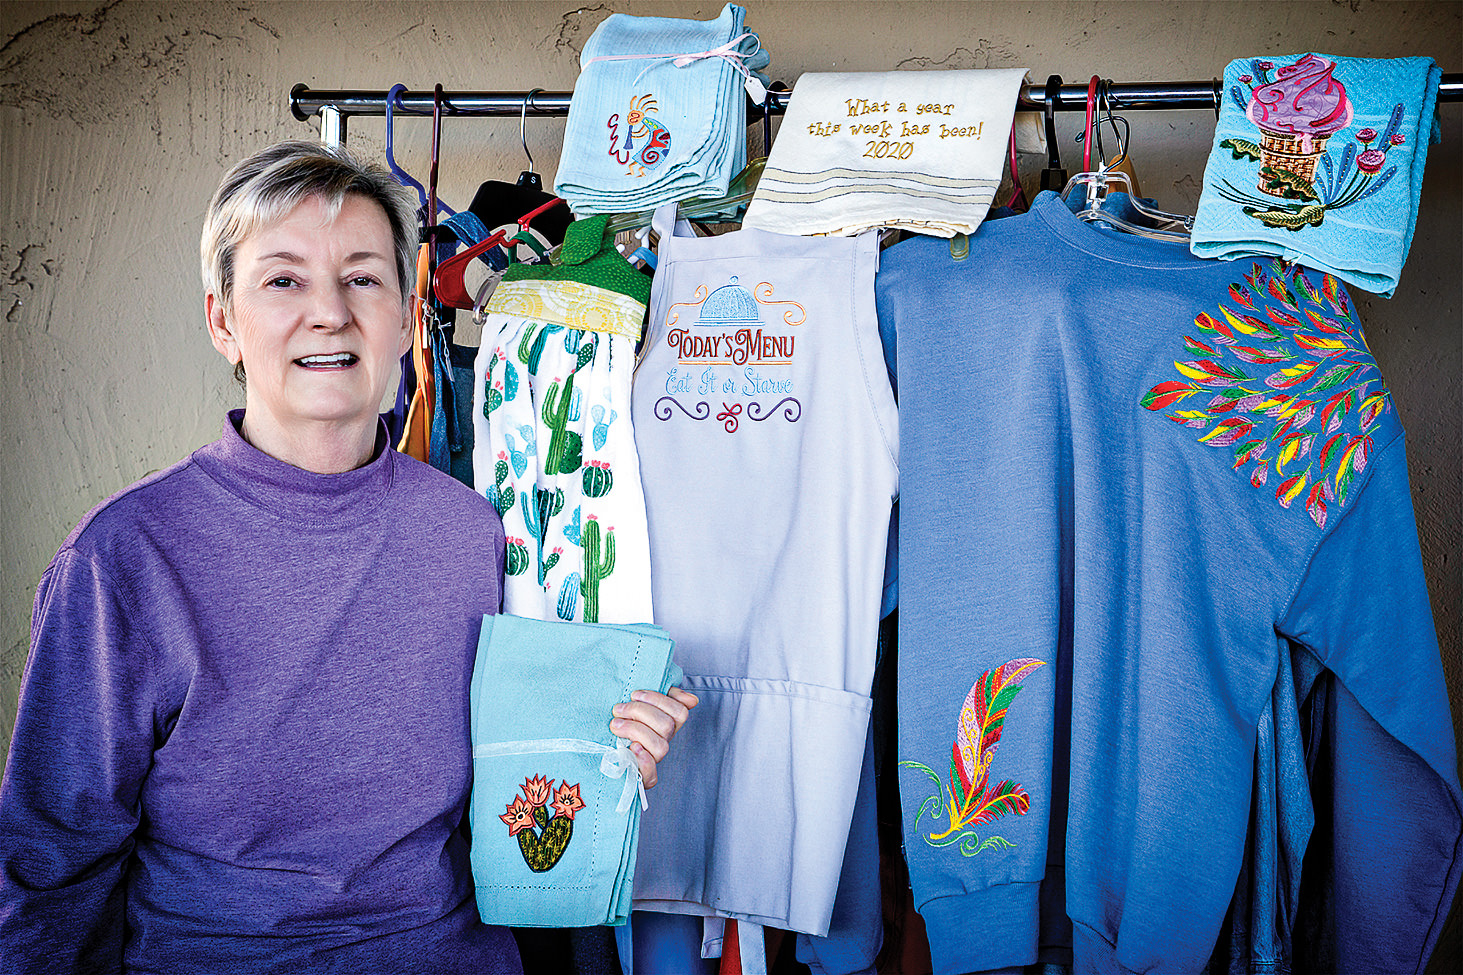 Kathy presenting some of her embroidery creations (Photo by Russell C. Stokes)